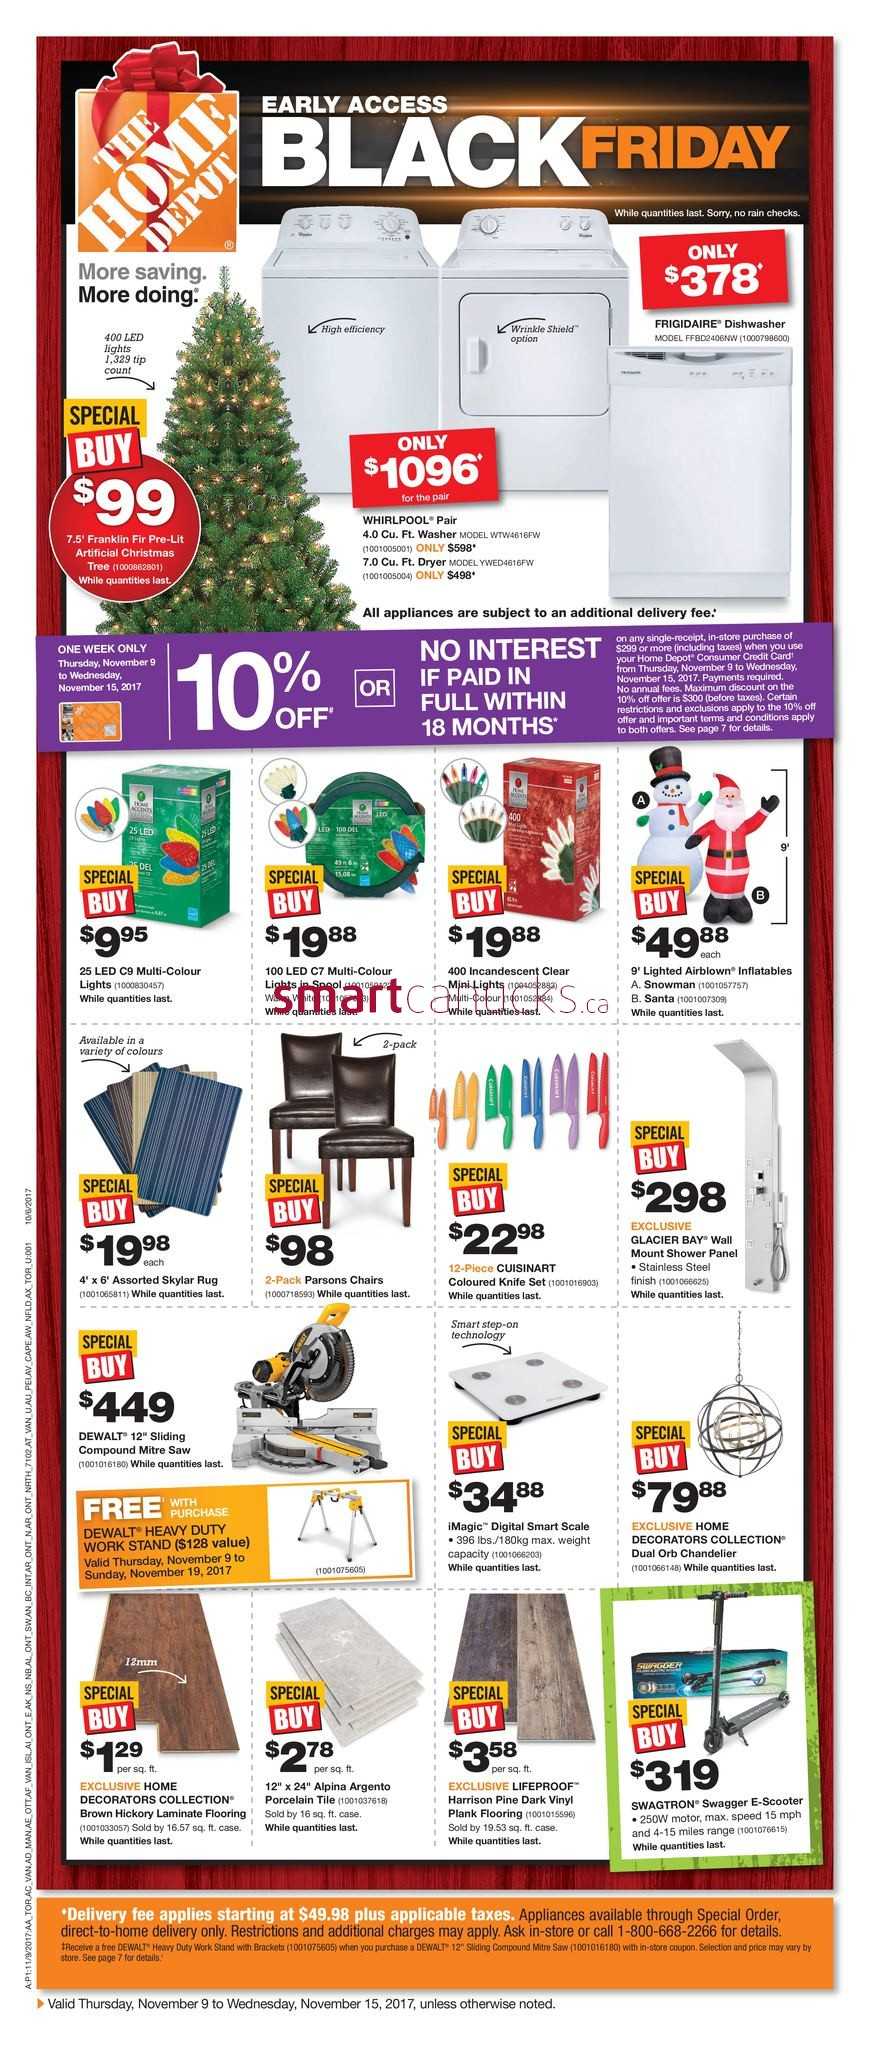 The Home Depot has a special financing offer for Labor Day weekend ...